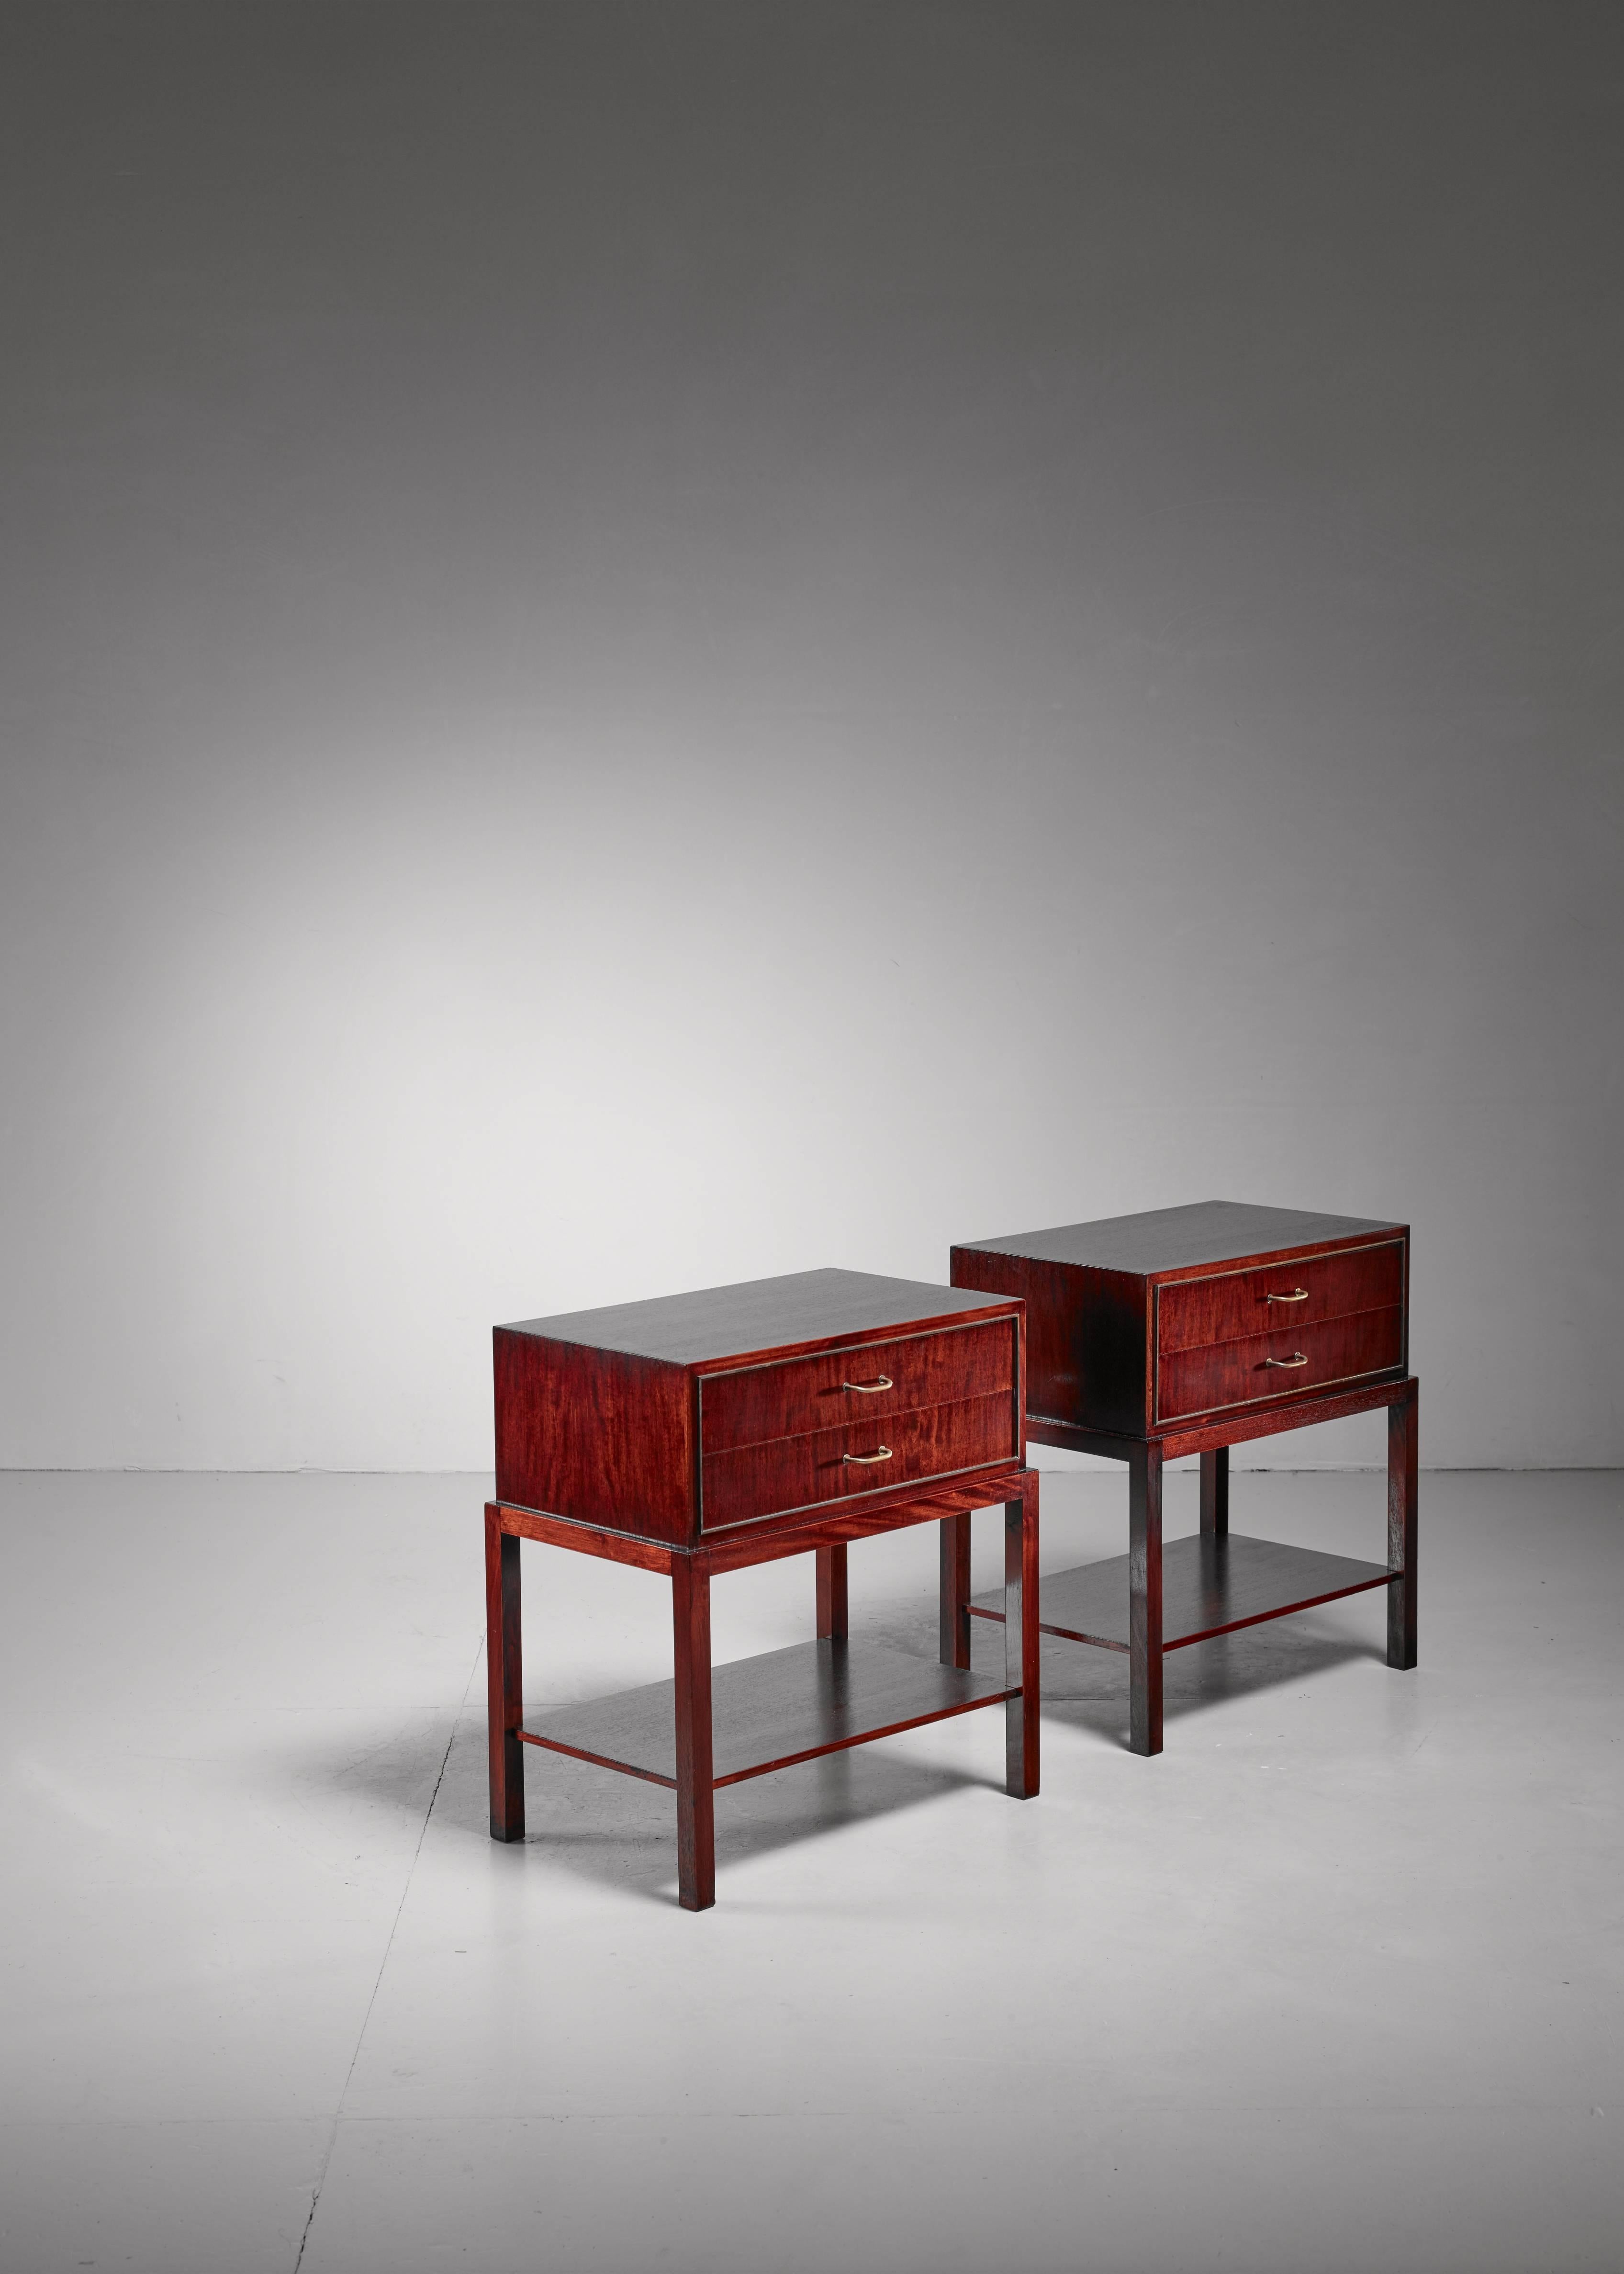 A pair of mahogany nightstands, attributed to Danish architect and designer Ernst Kühn (1890 - 1948) for Lysberg Hansen and Terp. The tables have a shelf and two drawers in a brass profile.

Labeled by Lysberg Hansen and Terp and in an excellent